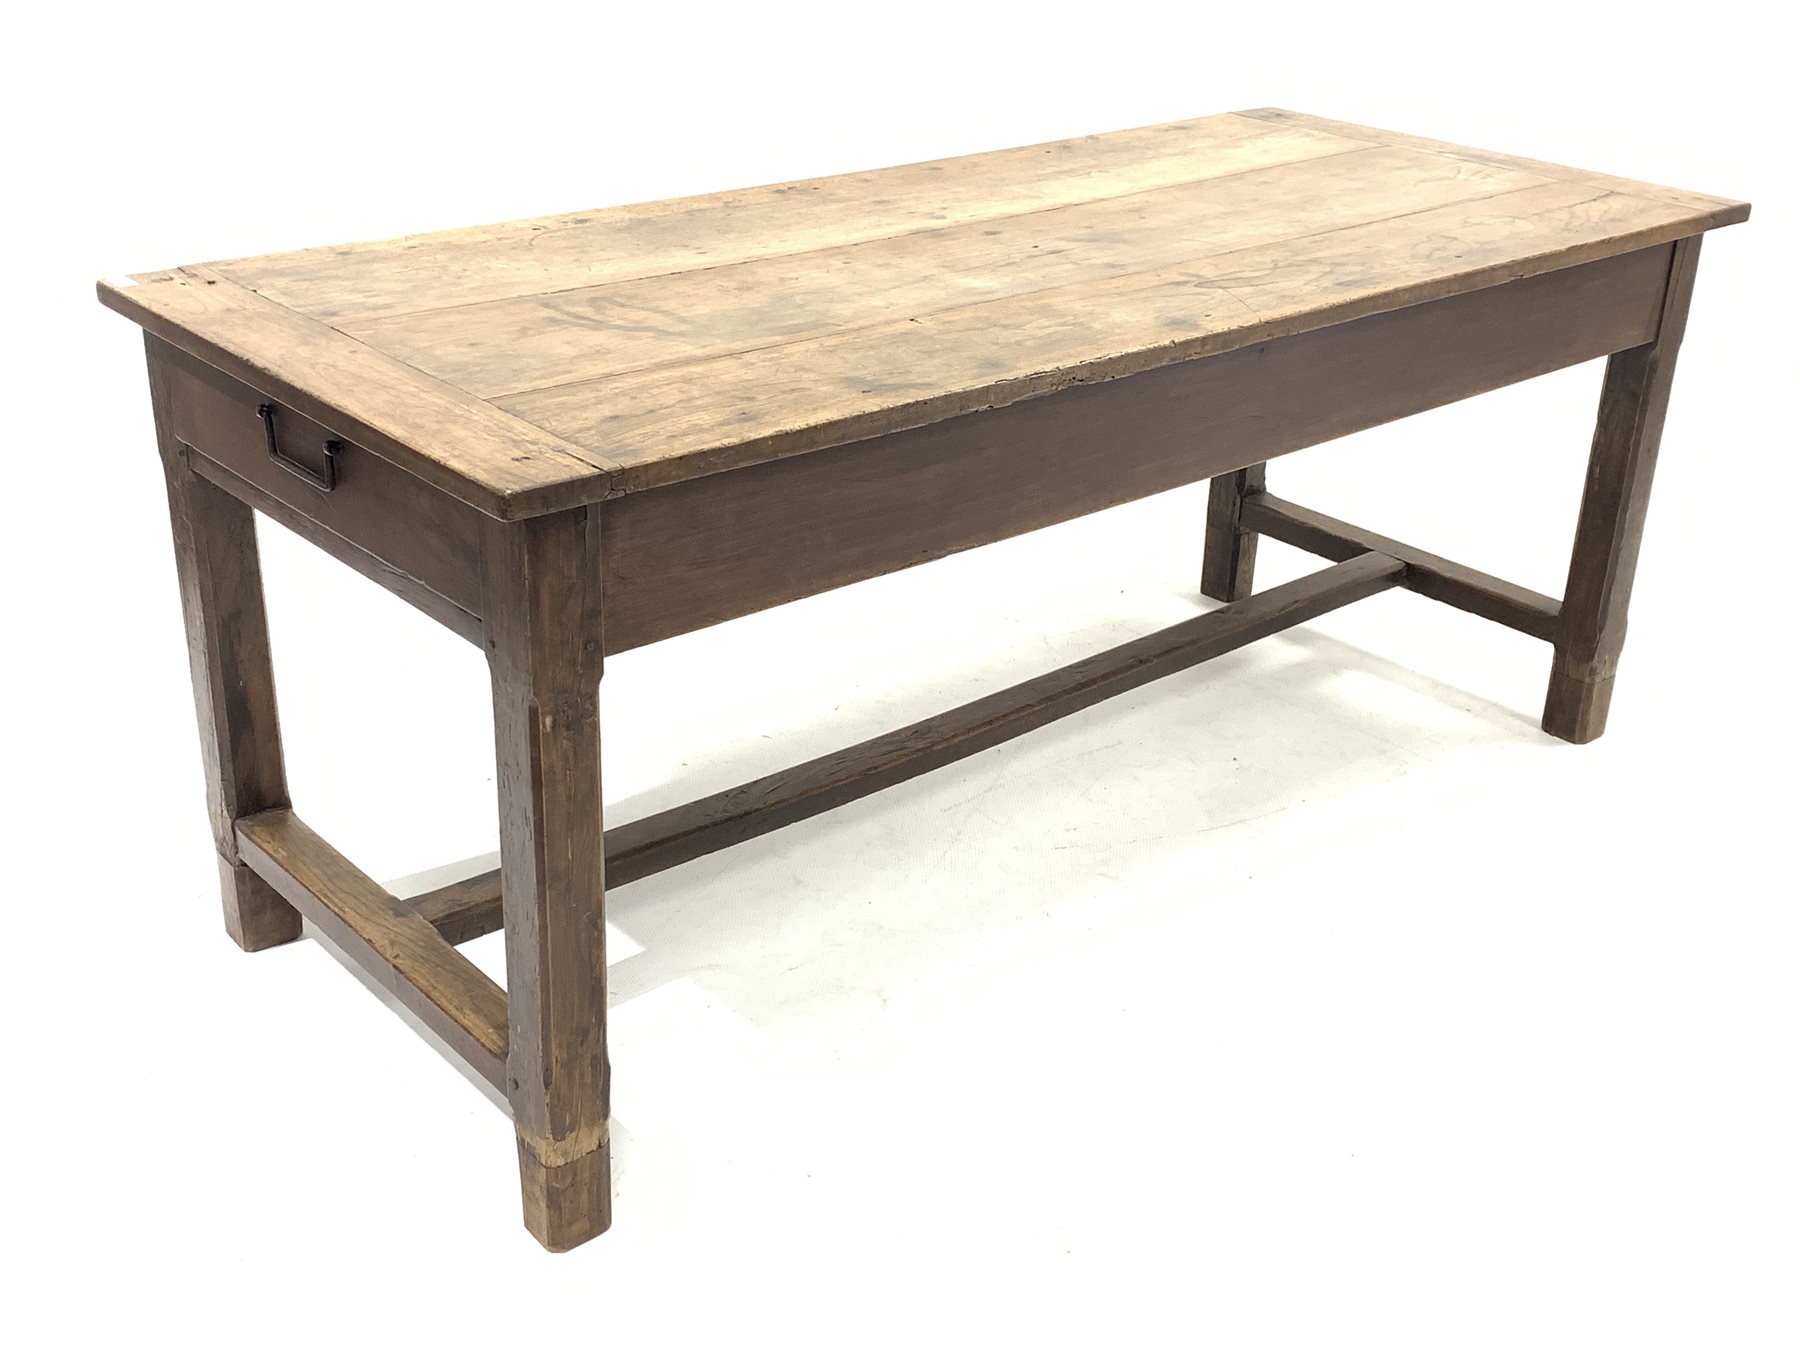 19th century French fruit wood kitchen table, plank top with bread boarded ends, straight supports c